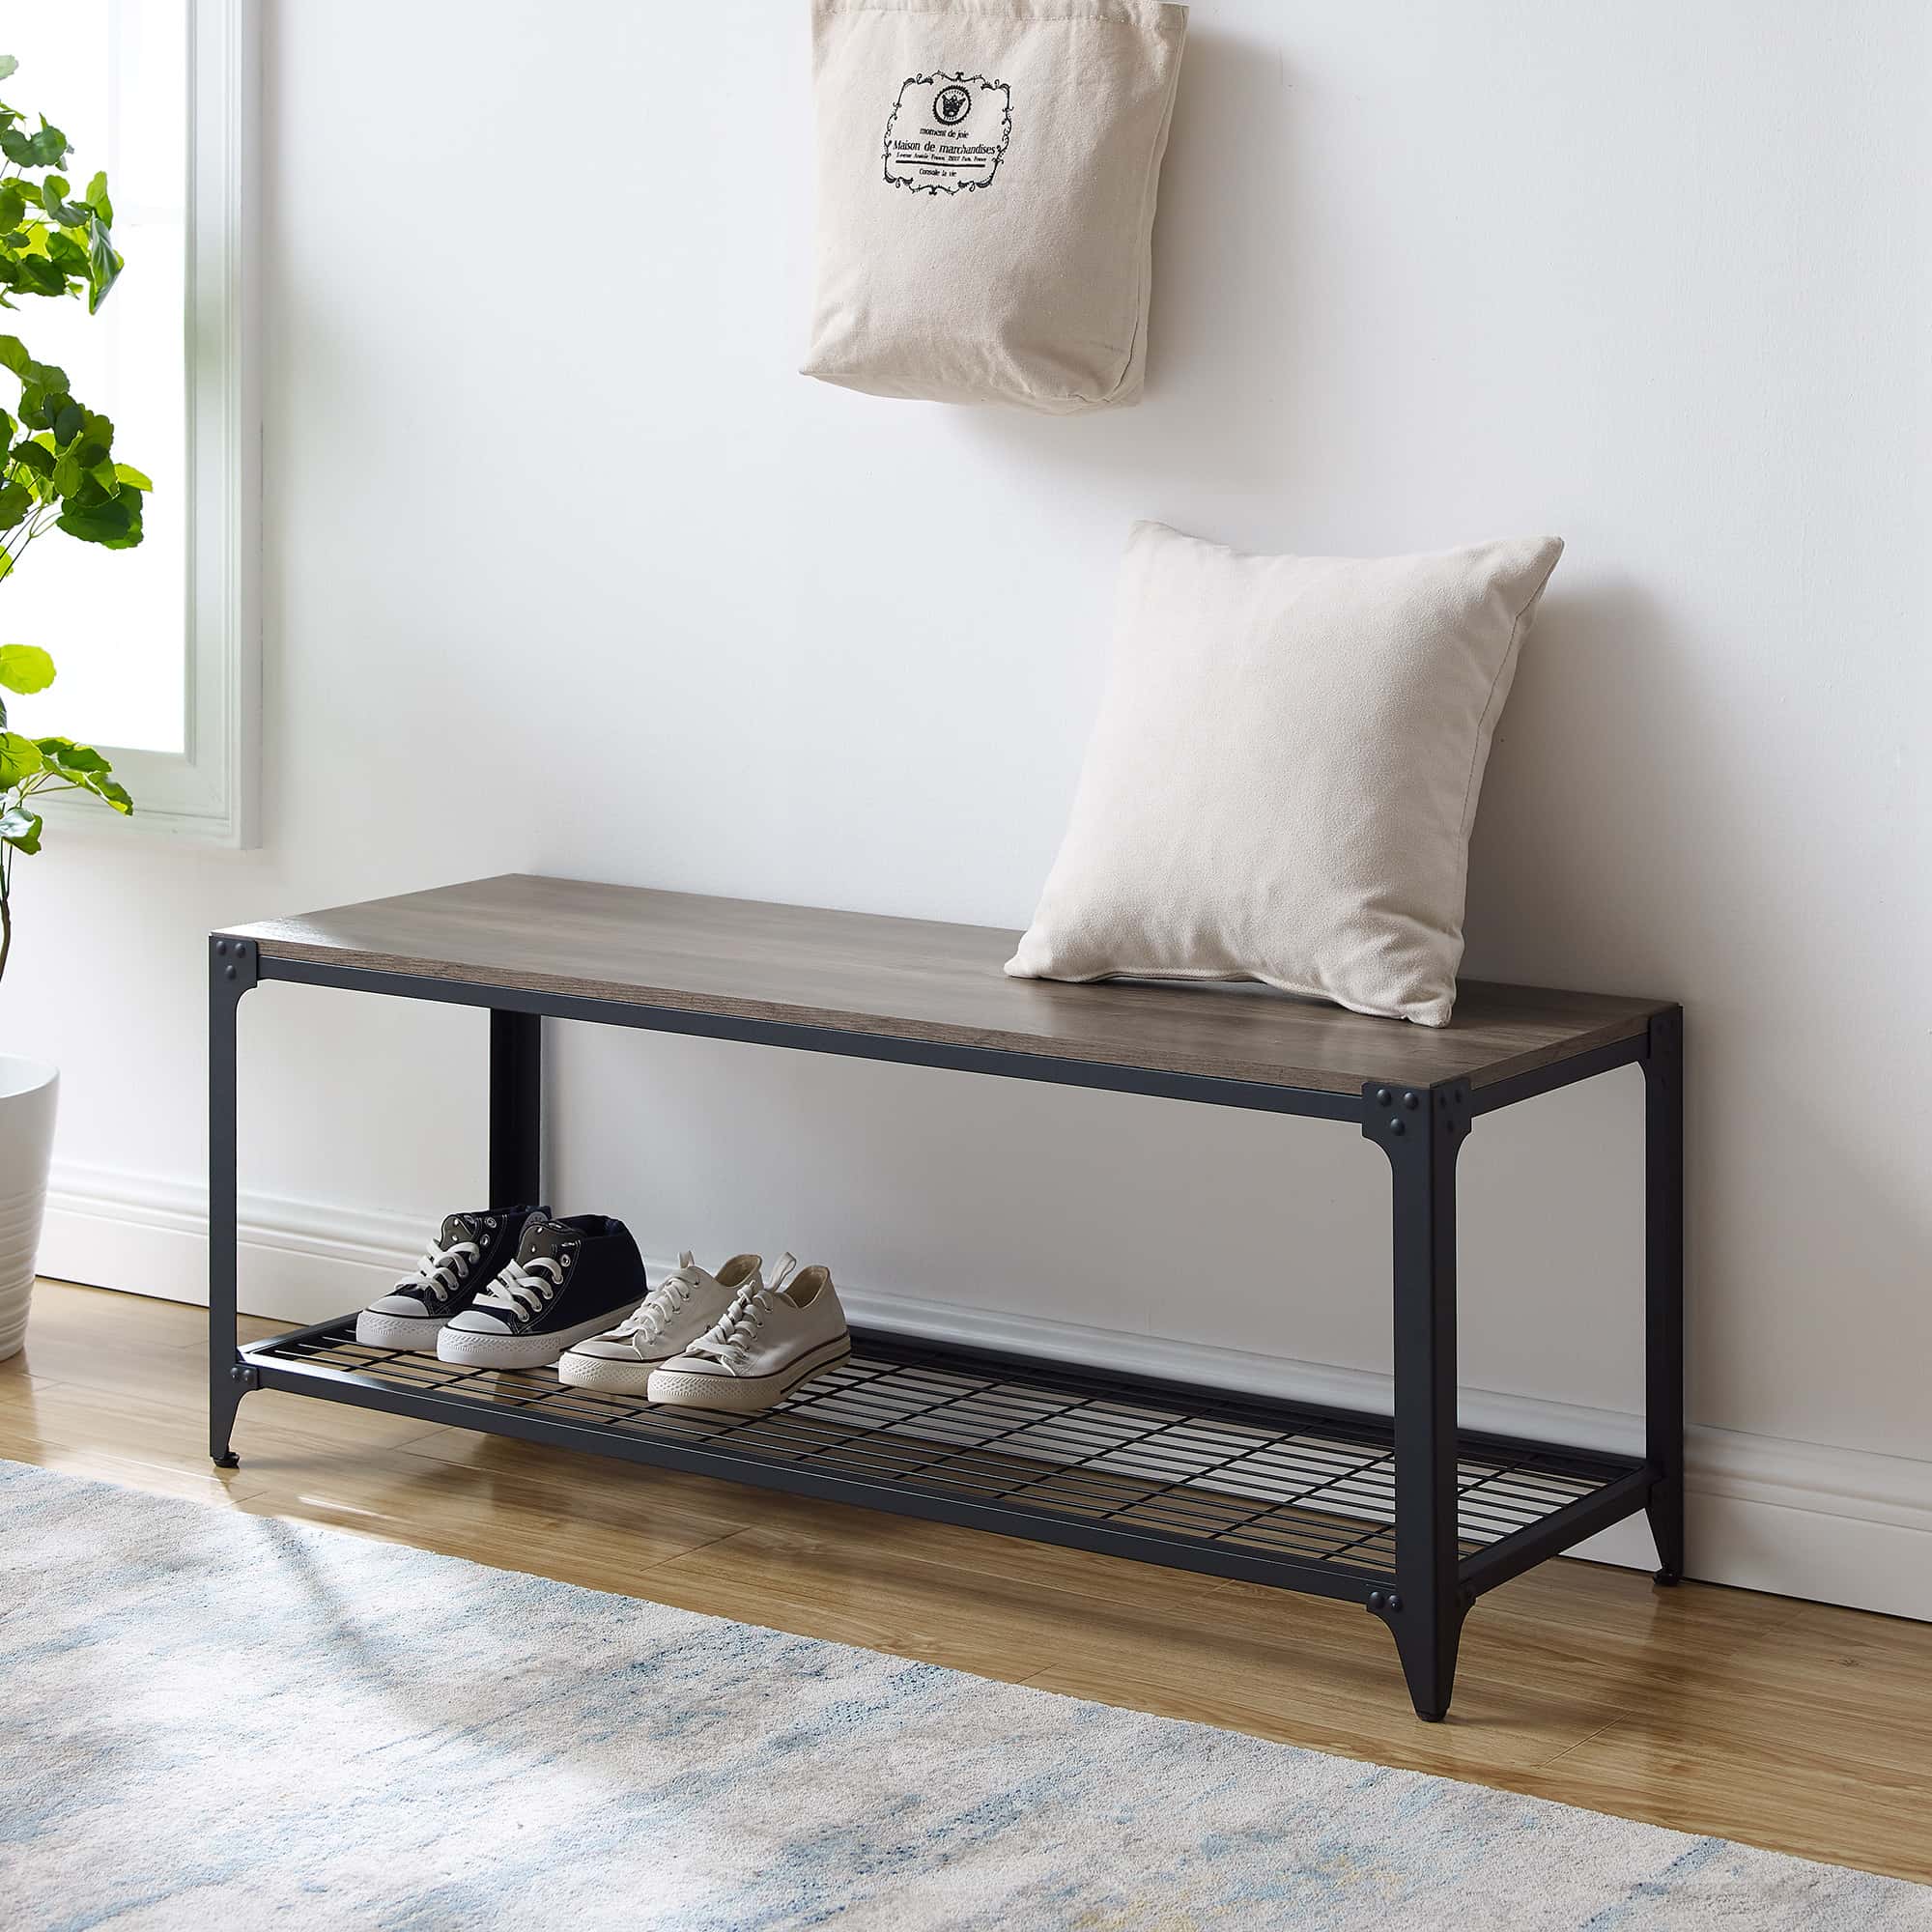 48 Inch Industrial Angle Iron Entry Bench - Grey Wash by Walker Edison